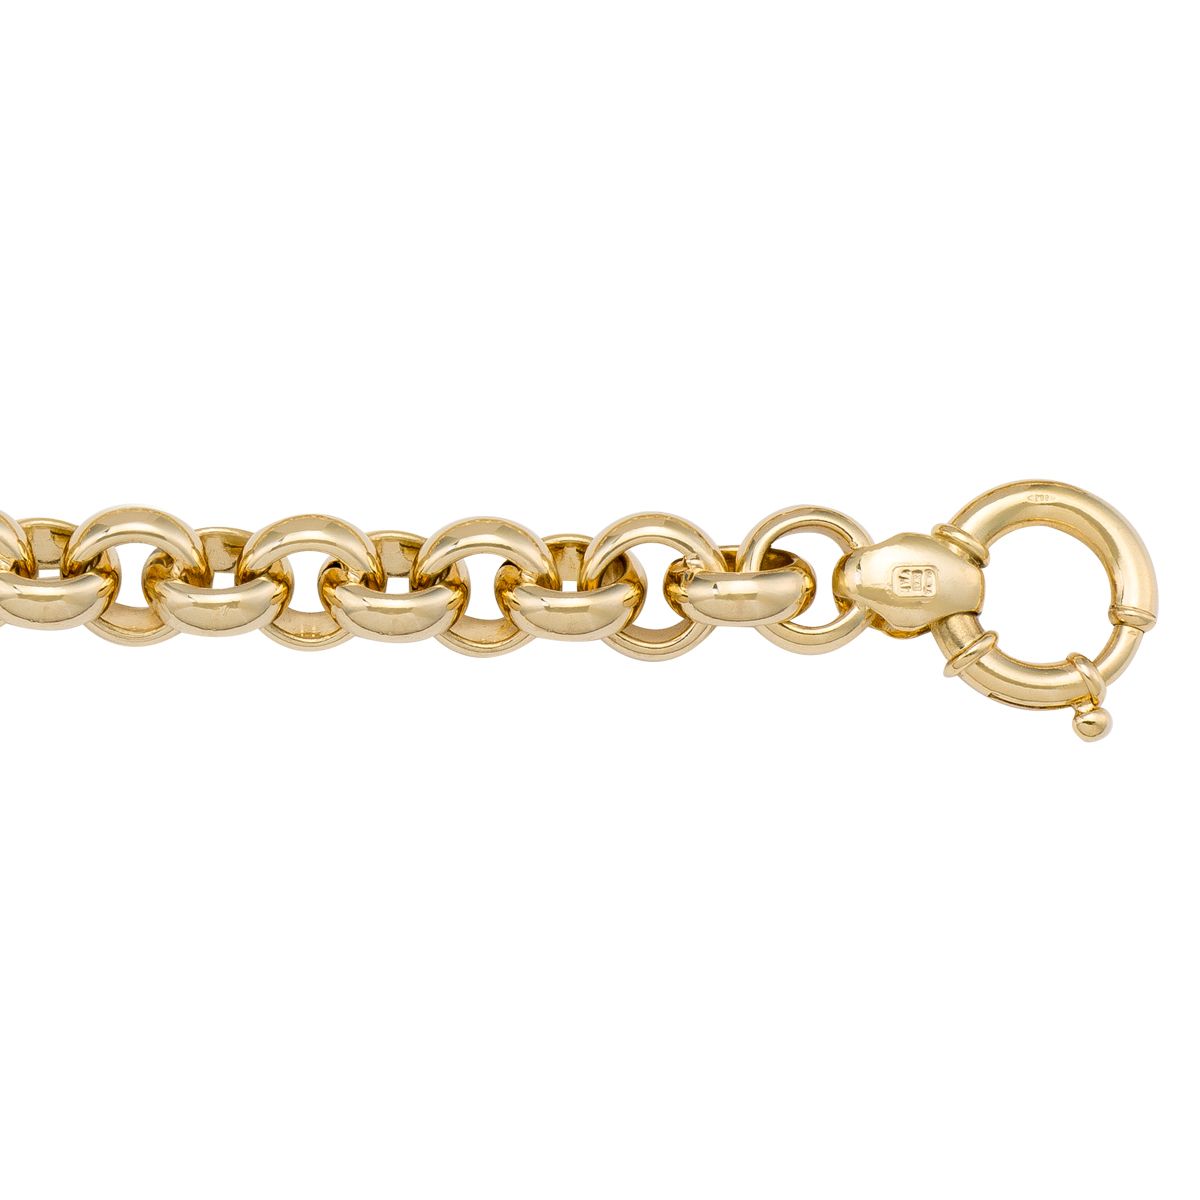 CROL01, Gold Bracelet, Hollow Rolo, Yellow Gold